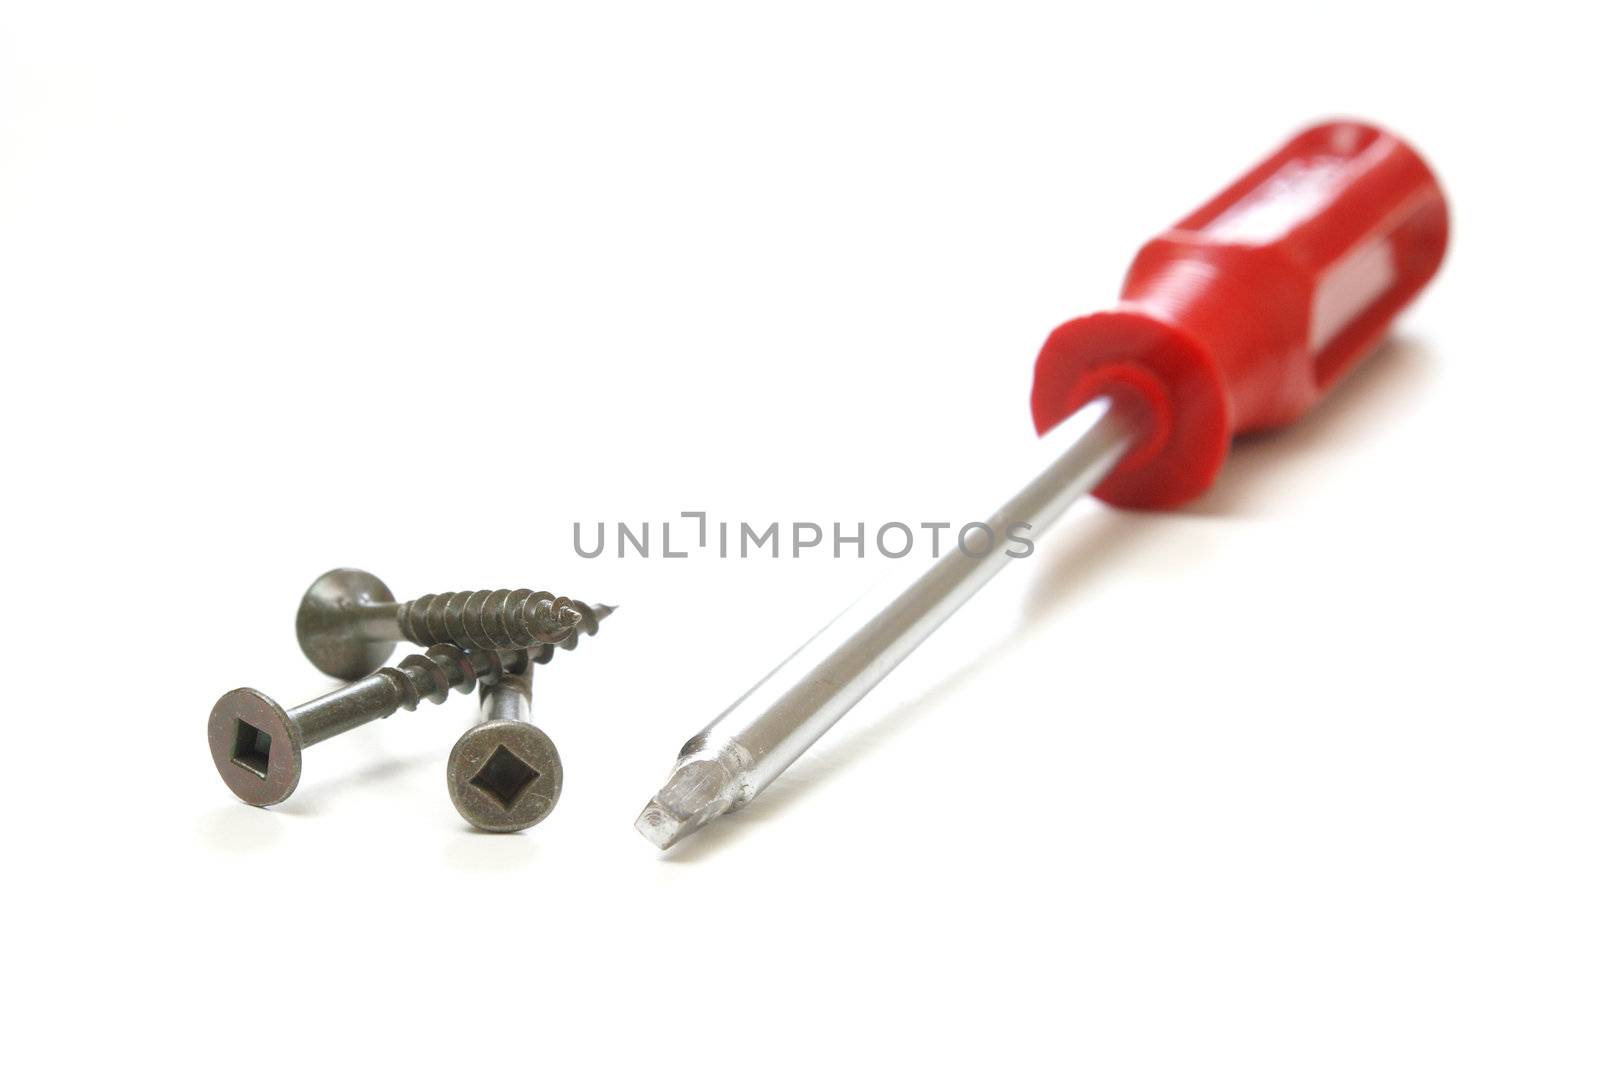 Screwdriver and Screws by AlphaBaby